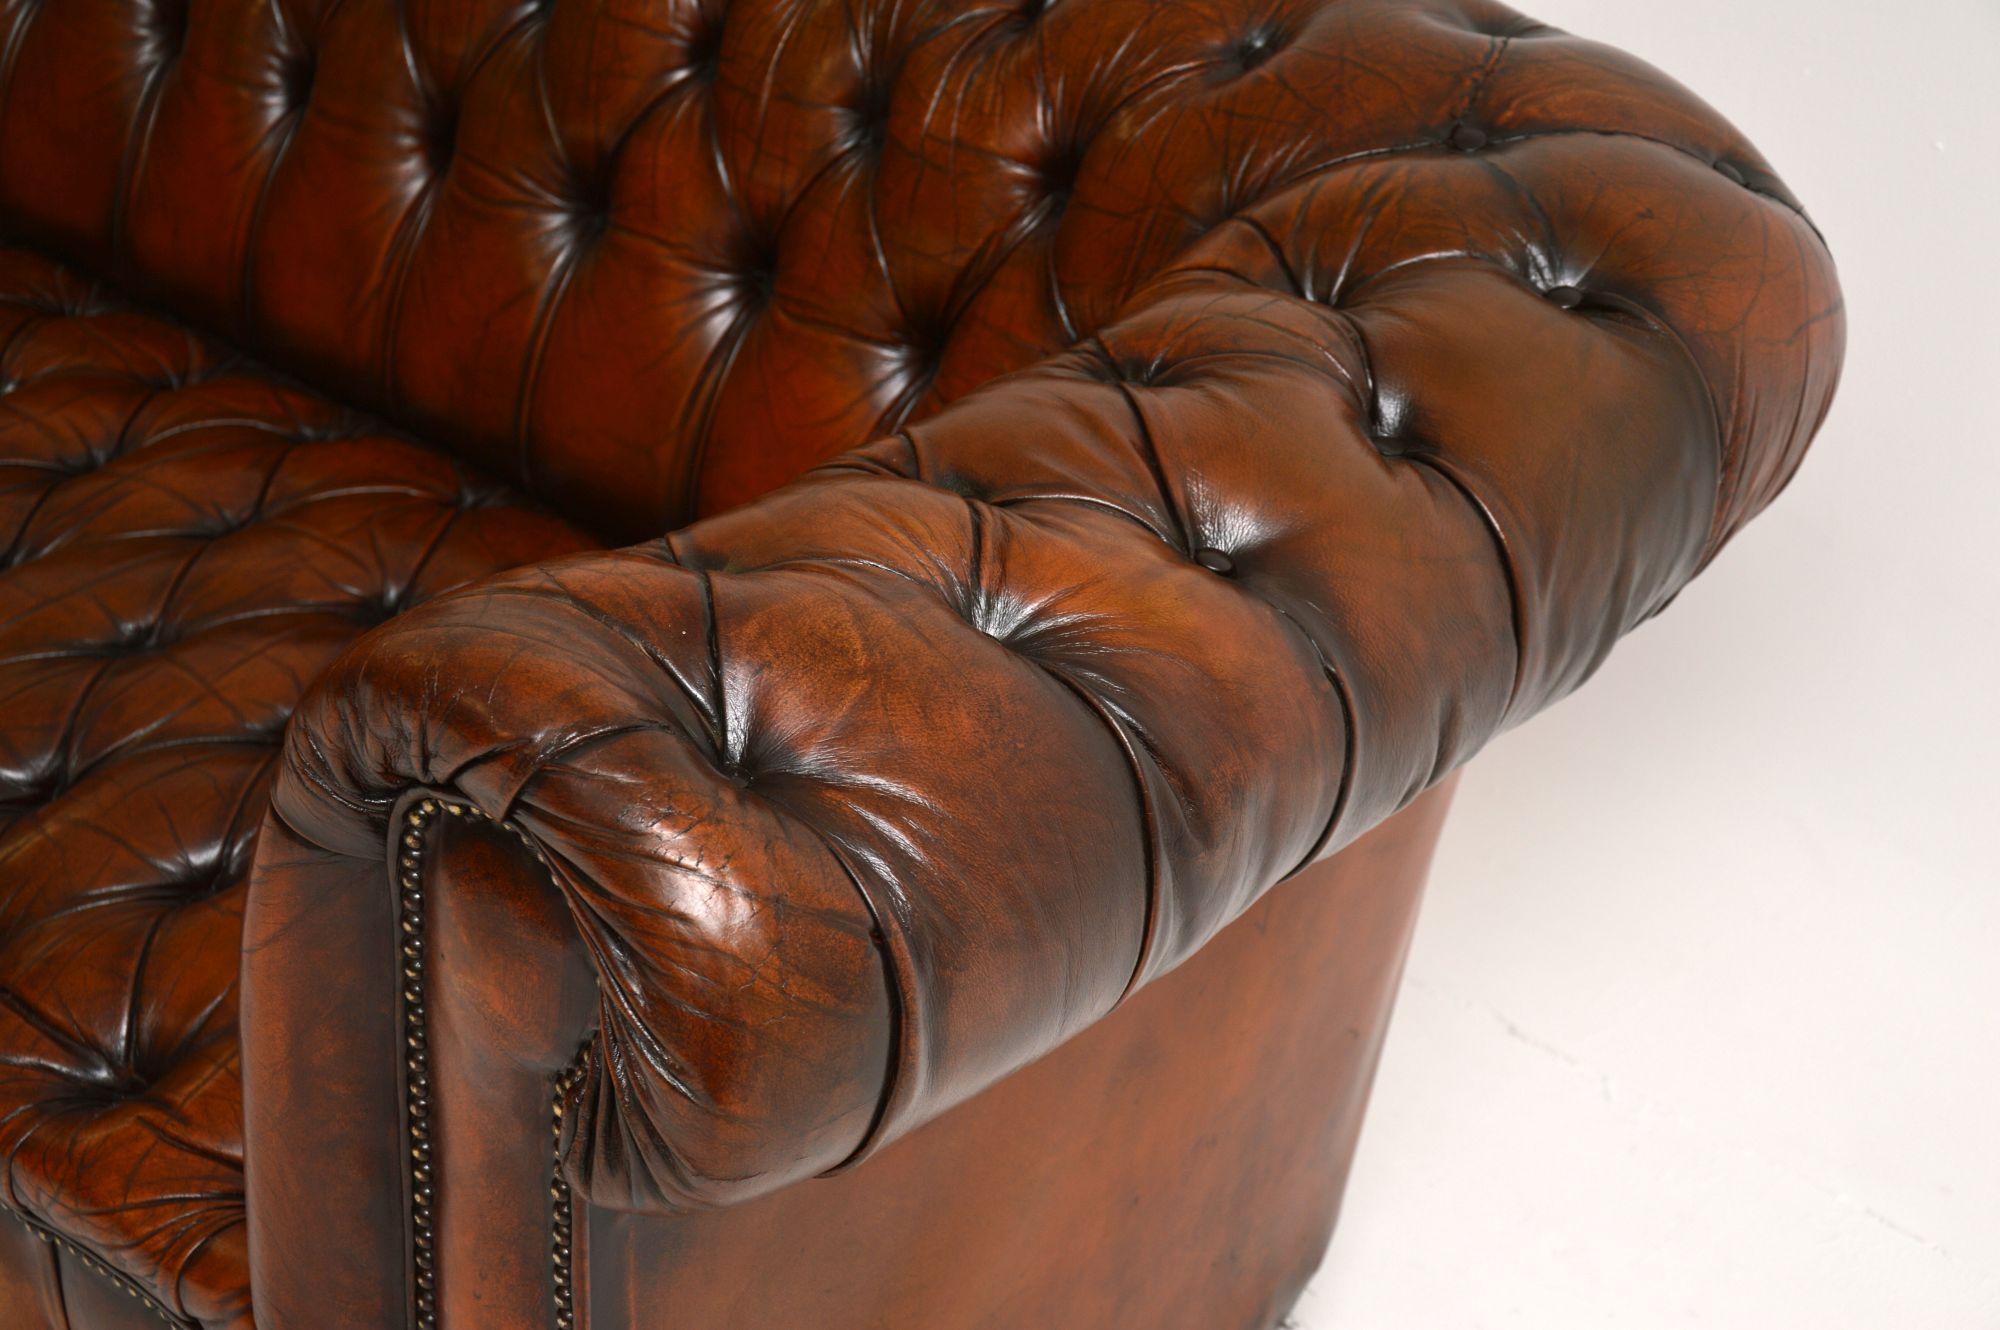 Antique Deep Buttoned Leather Chesterfield Sofa 2